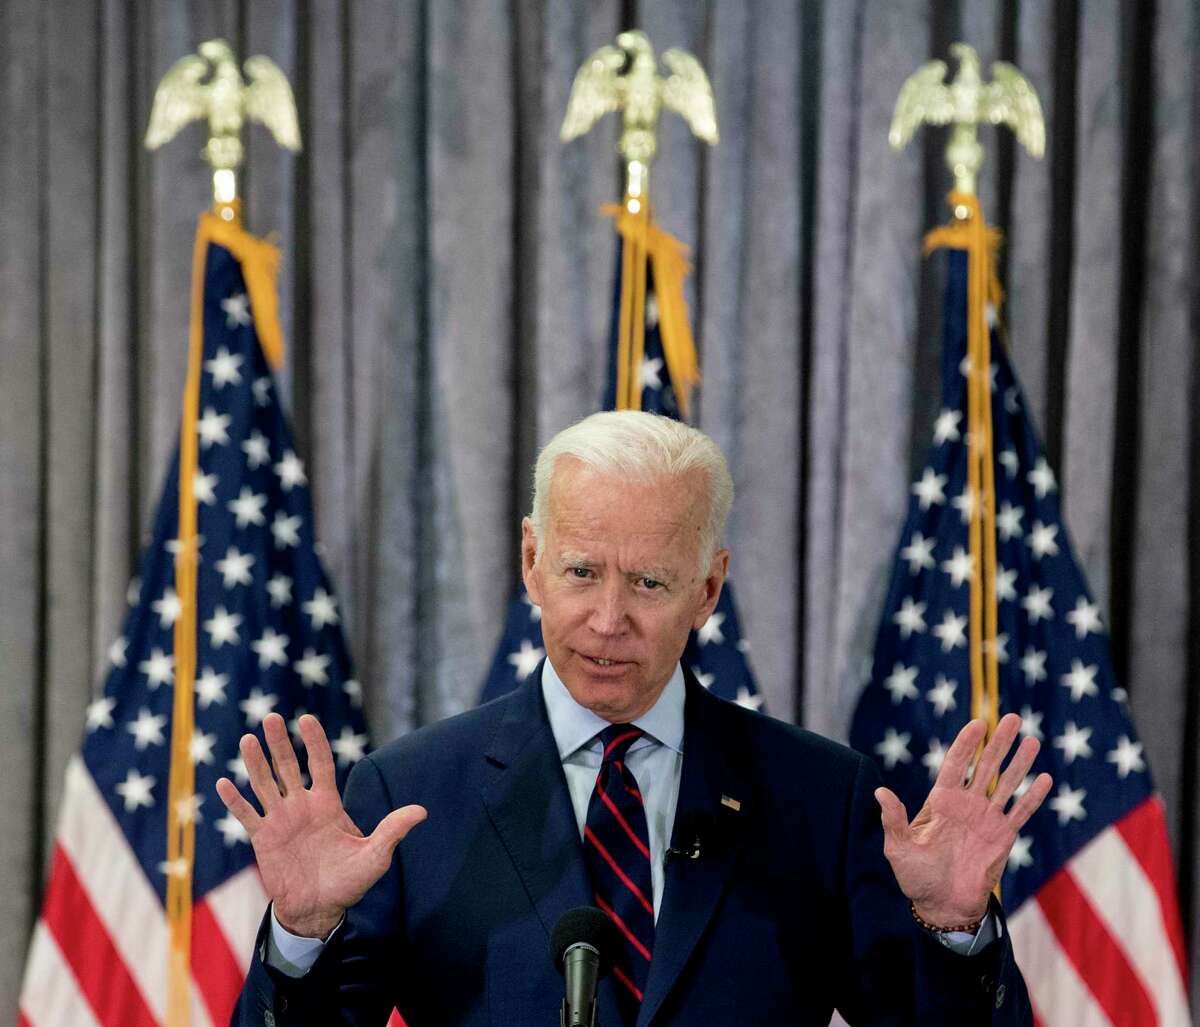 Former Vice President Joe Biden, a 2020 Democratic presidential hopeful, speaks during a town all meeting with a group of educators from the American Federation of Teachers on Tuesday, May 28, 2019, in Houston.